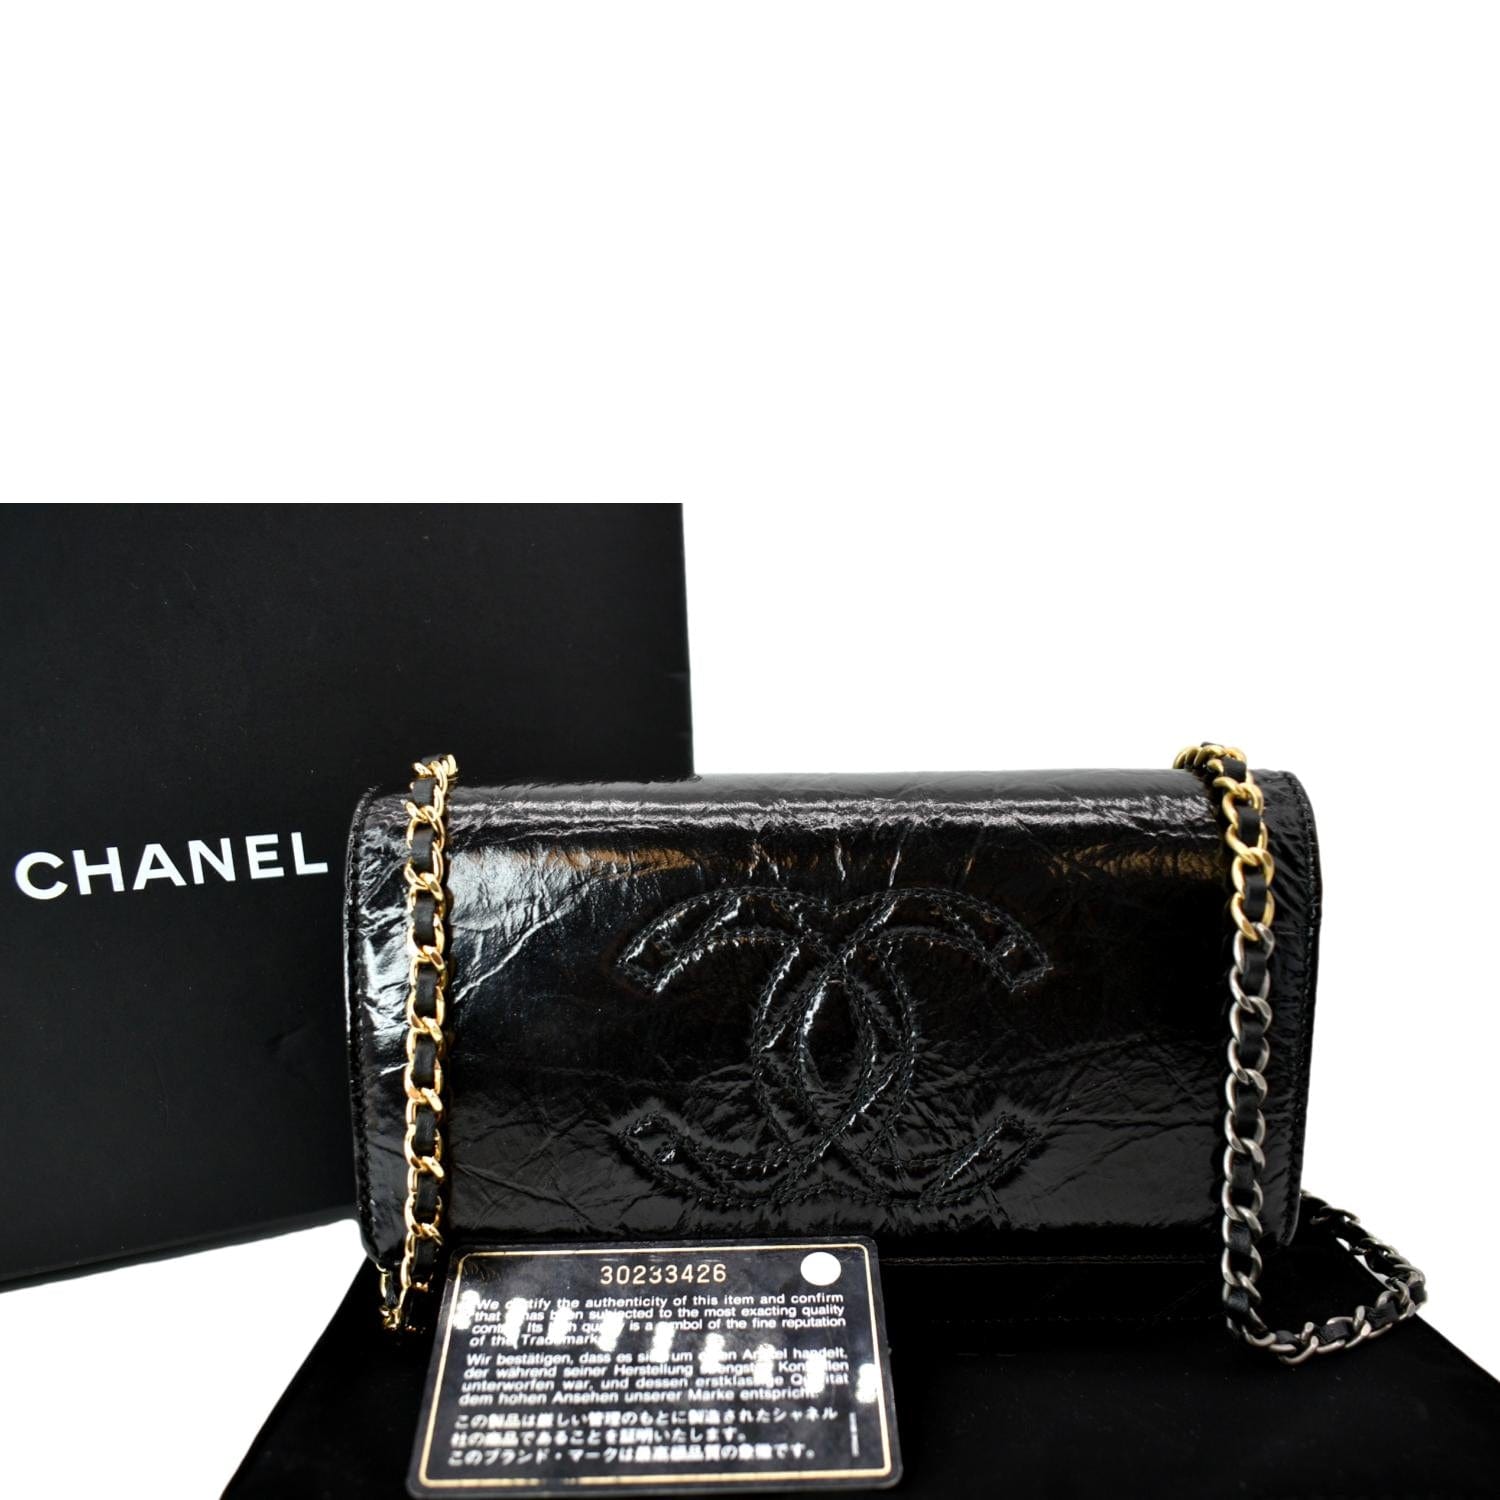 Chanel Brand New Black Crinkled Leather Coin Purse Crossbody Bag